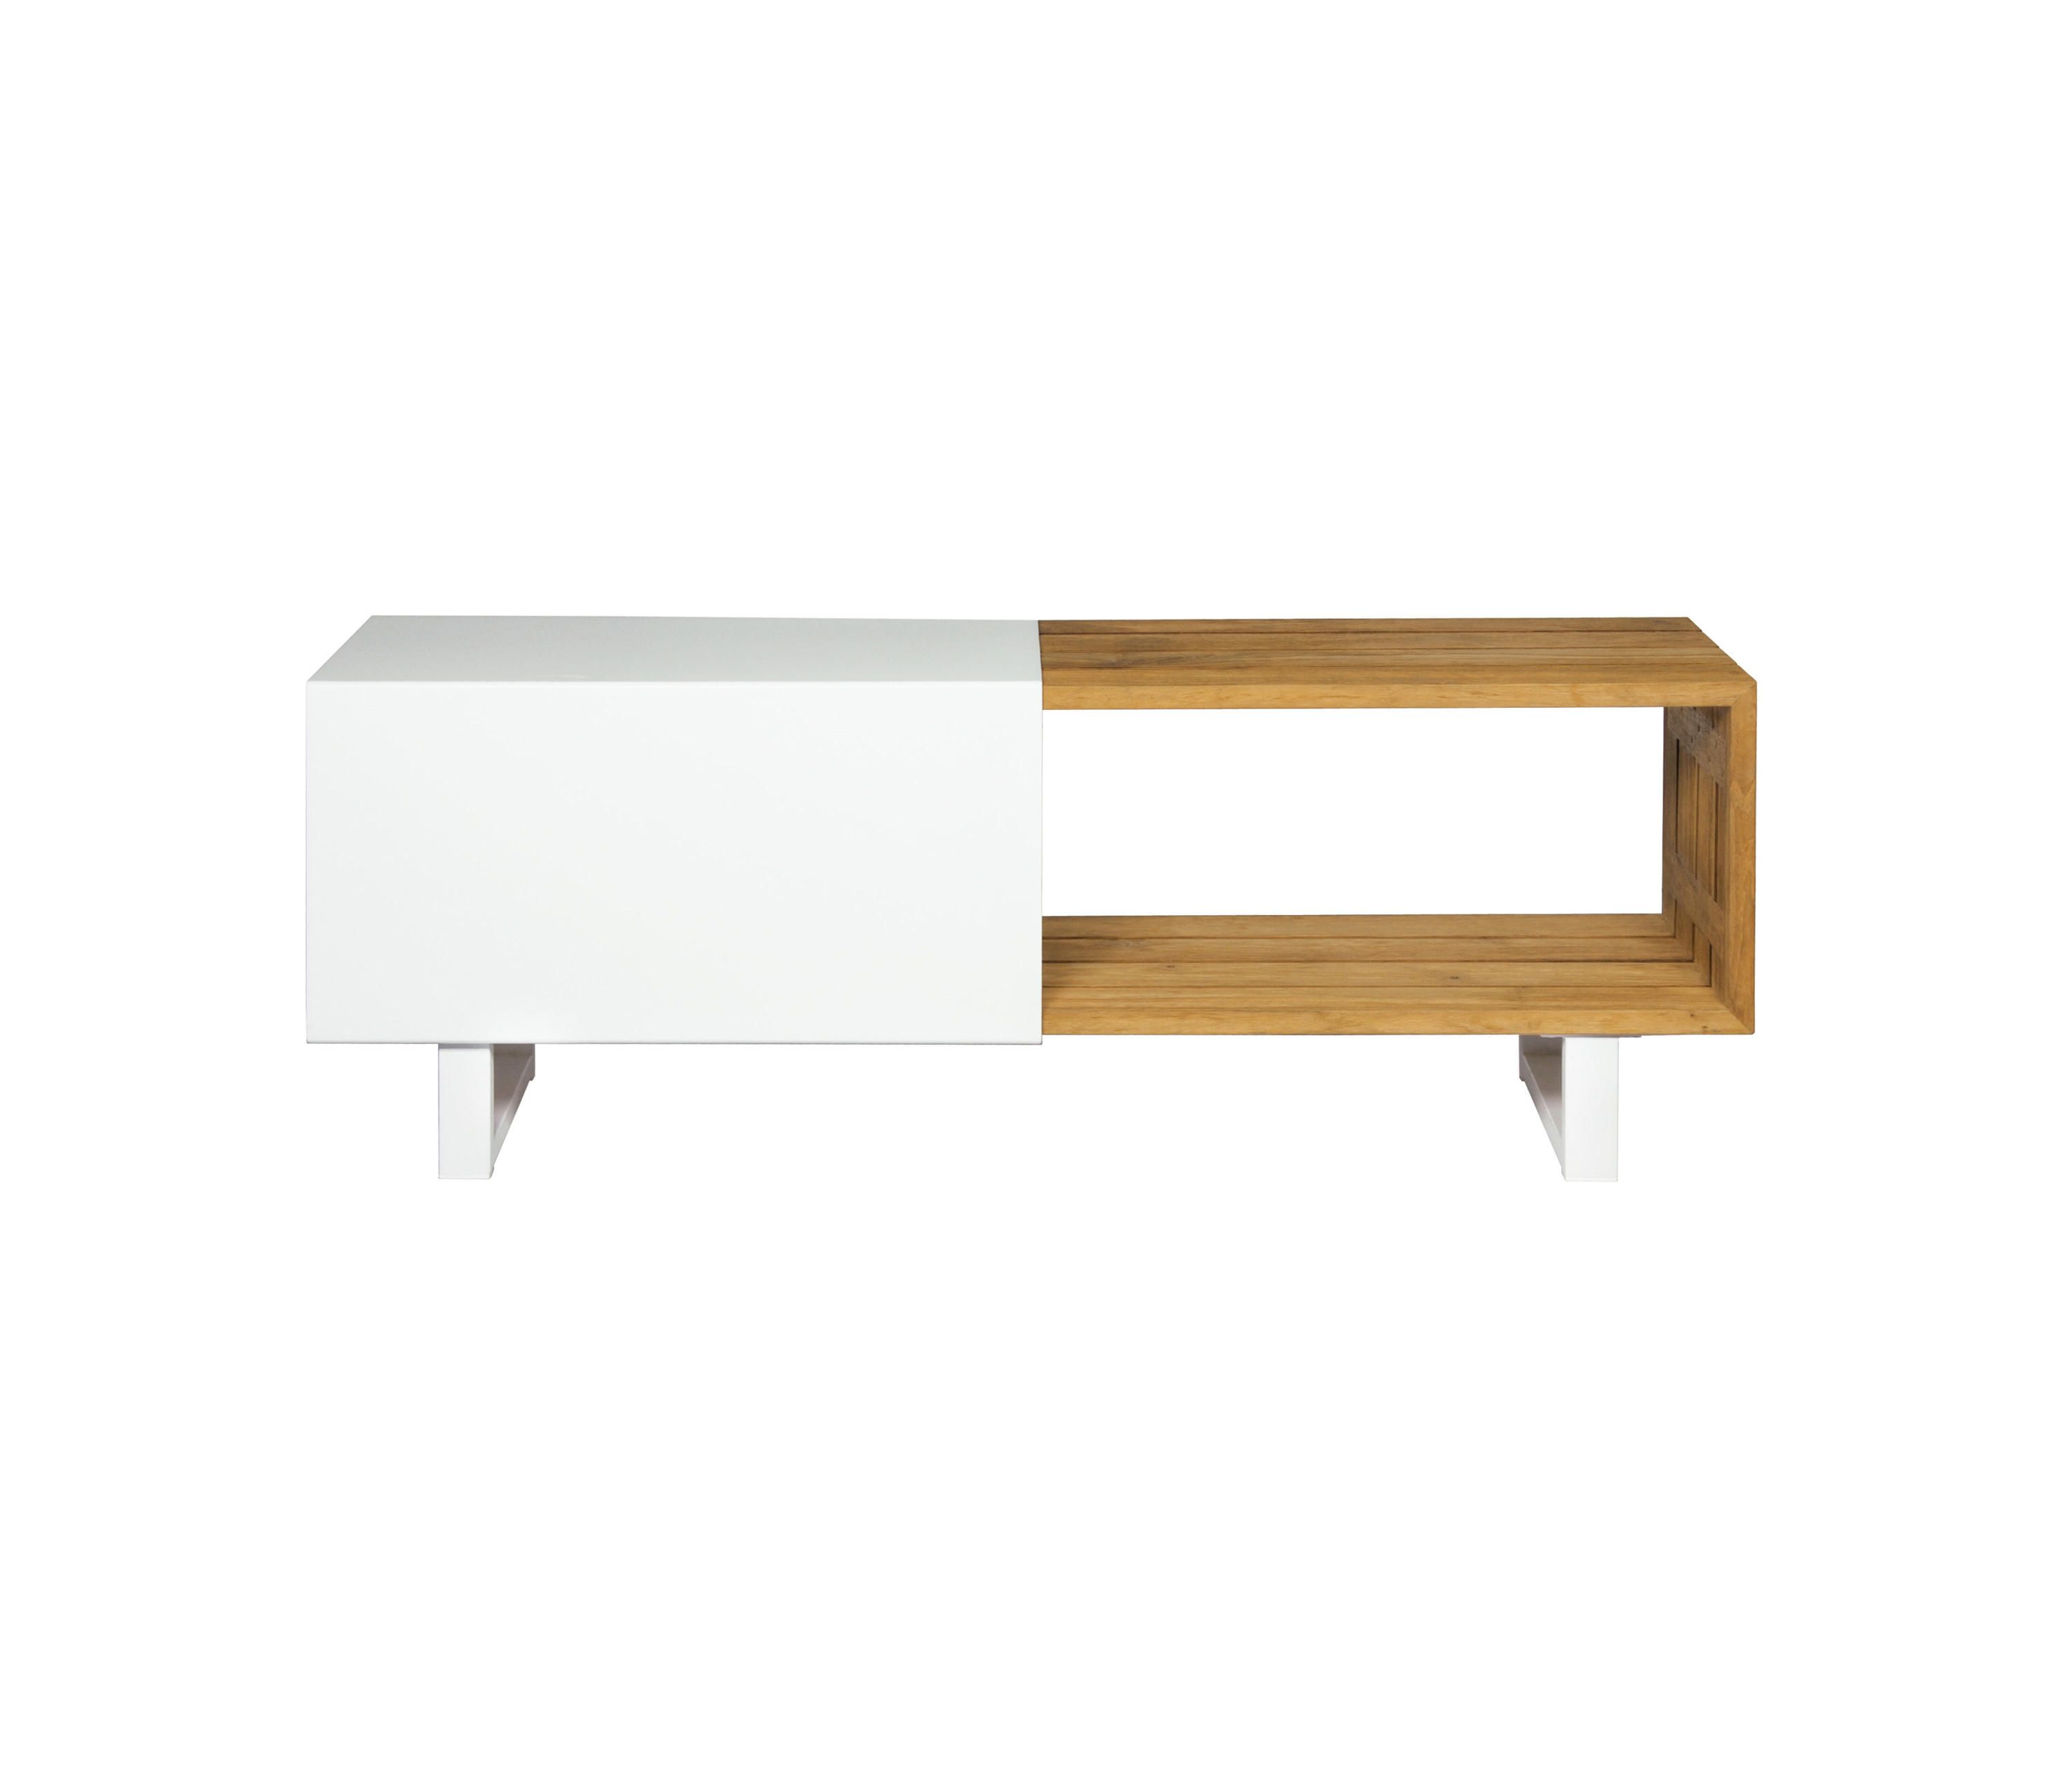 Outbox – Sideboards / Kommoden Von Mamagreen | Architonic Regarding Lola Sideboards (Photo 22 of 30)